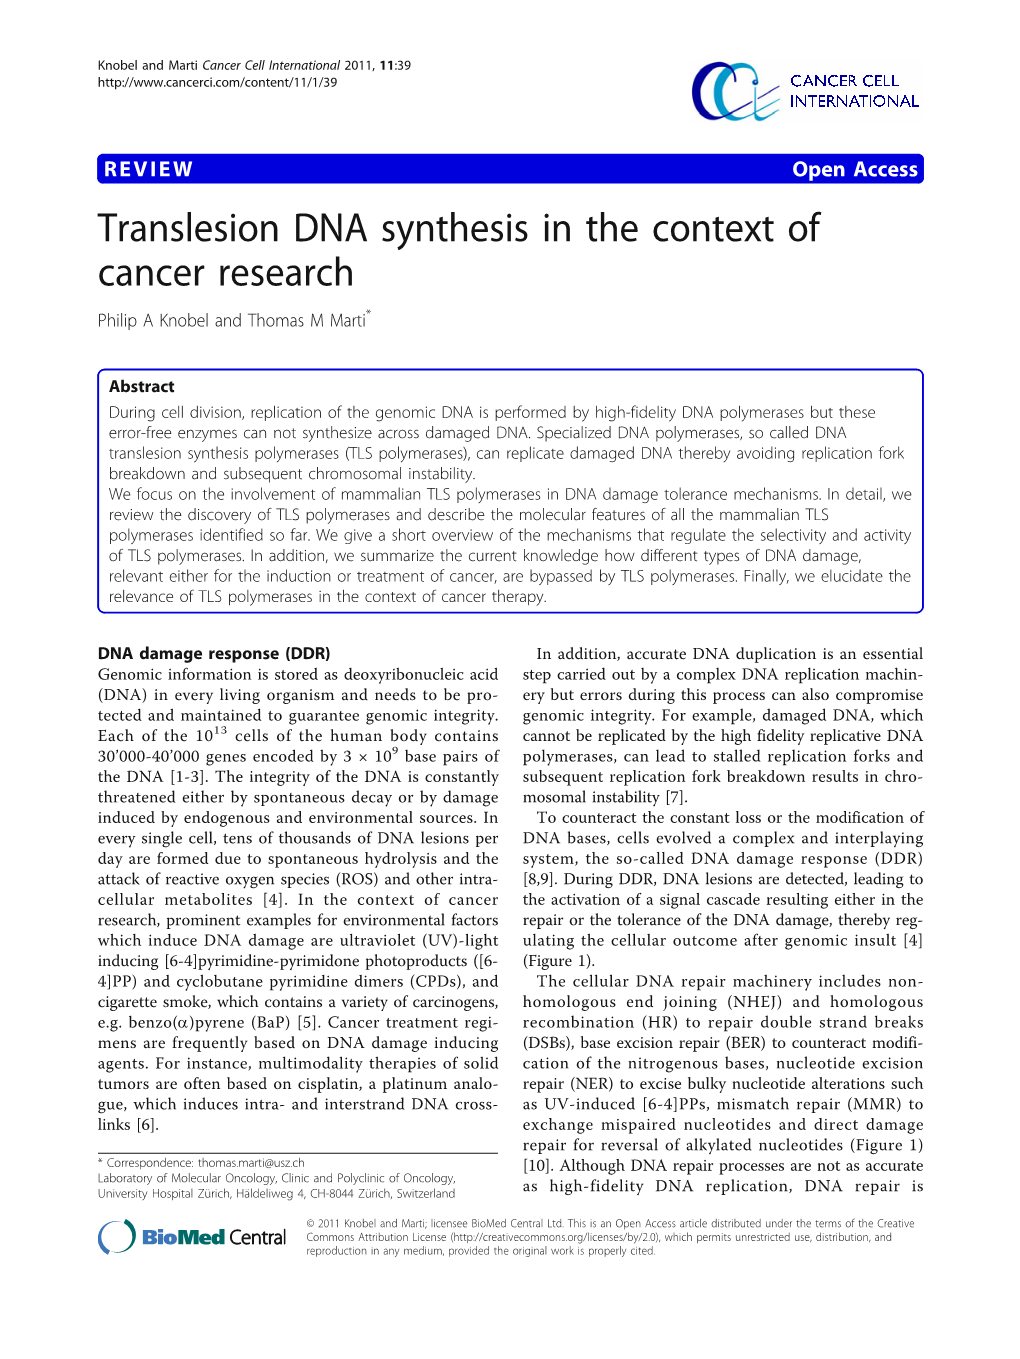 Translesion DNA Synthesis in the Context of Cancer Research Philip a Knobel and Thomas M Marti*